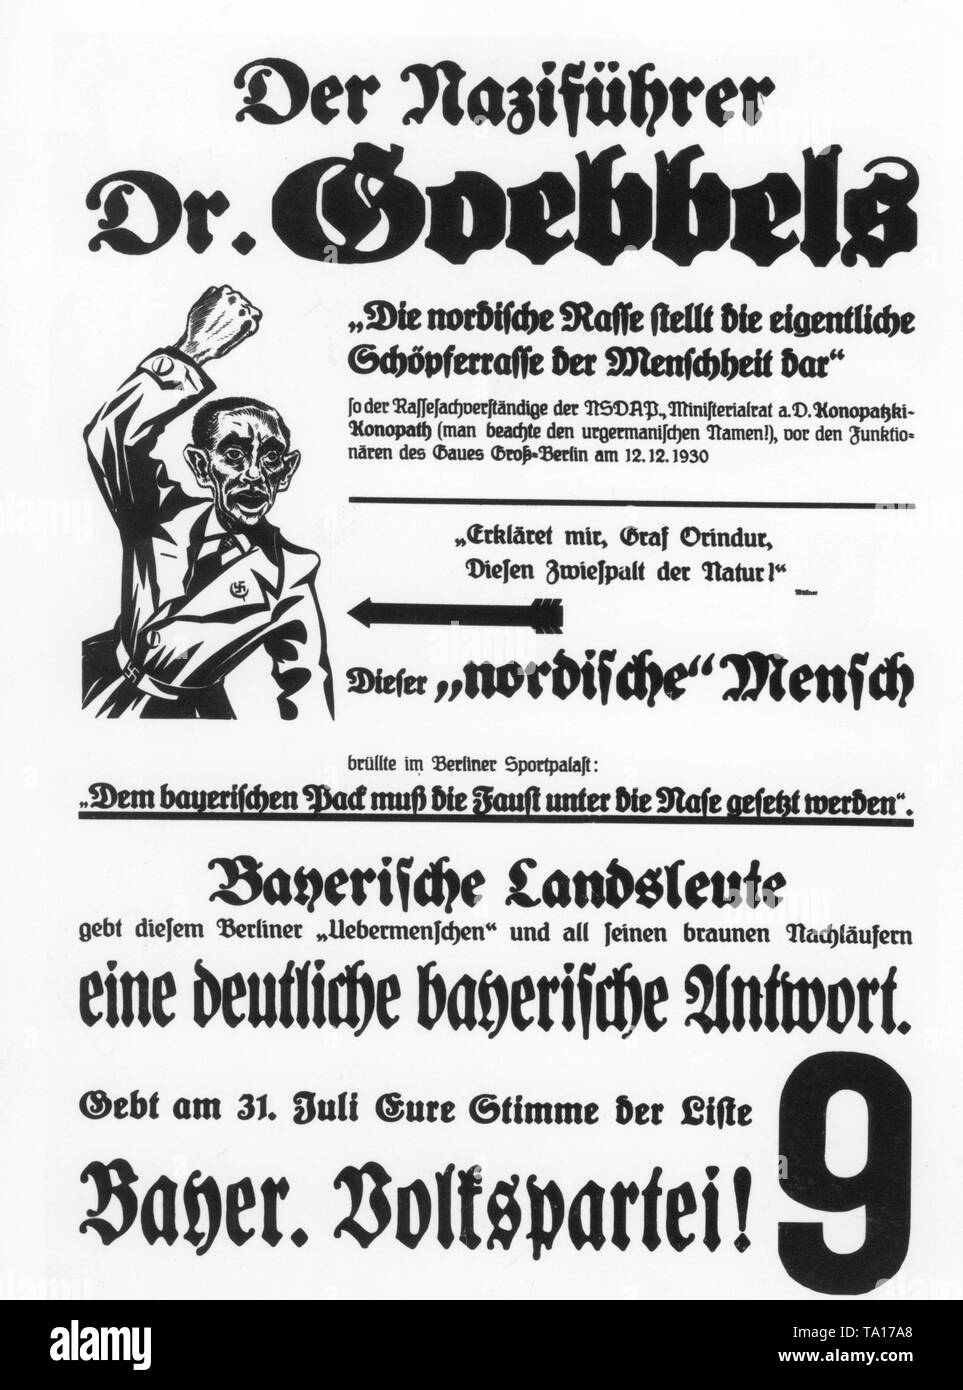 An election poster of the Bavarian People's Party from 1932 campaigning against 'Nazi leader Dr. Goebbles' and the anti-Bavarian statements he made in a speech at the Berlin Sportpalast. Stock Photo